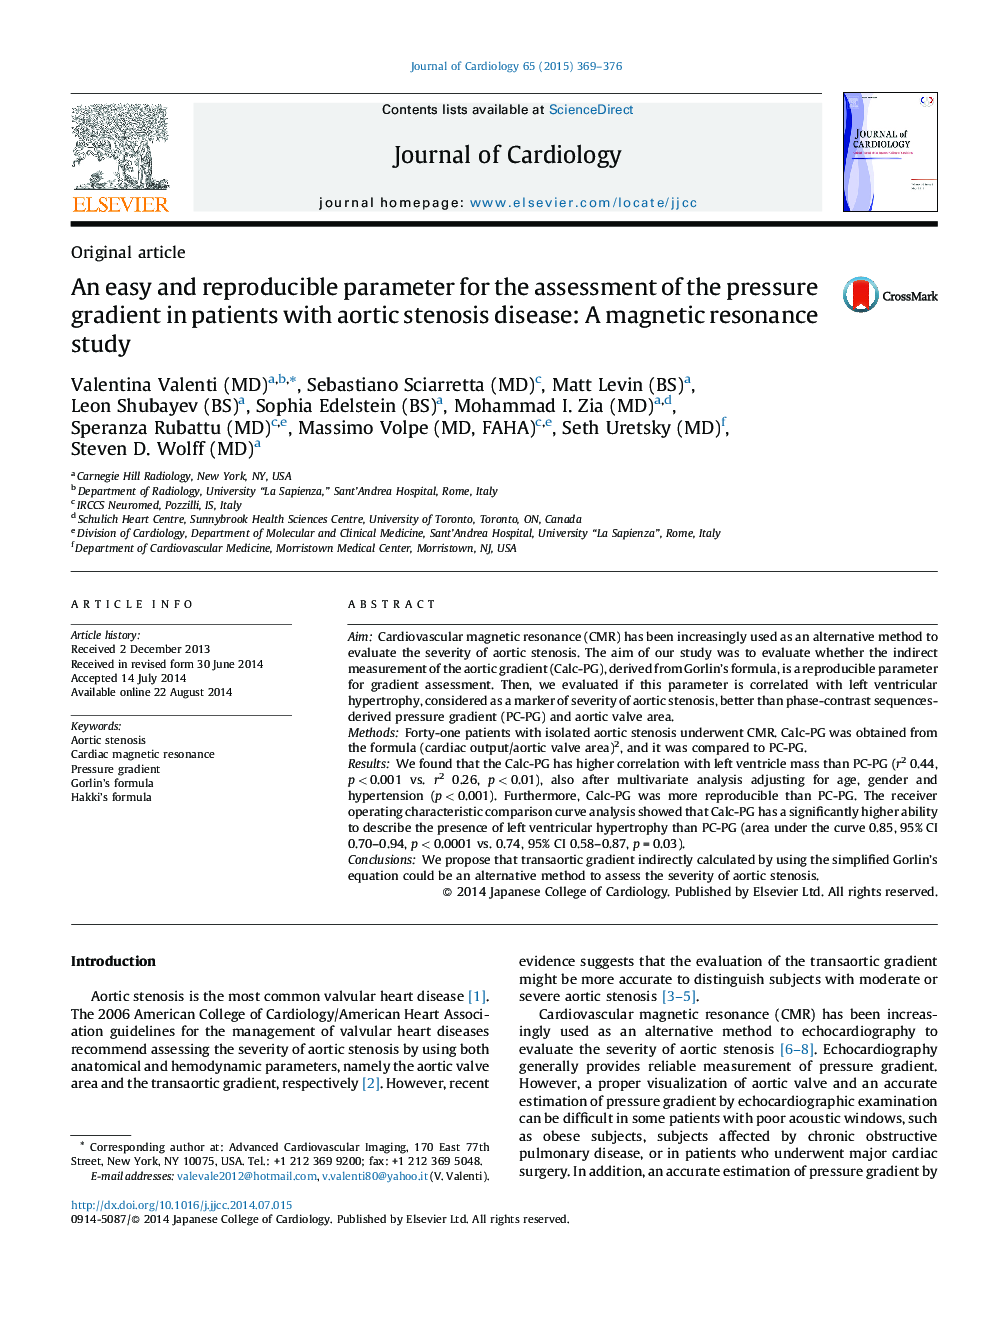 An easy and reproducible parameter for the assessment of the pressure gradient in patients with aortic stenosis disease: A magnetic resonance study